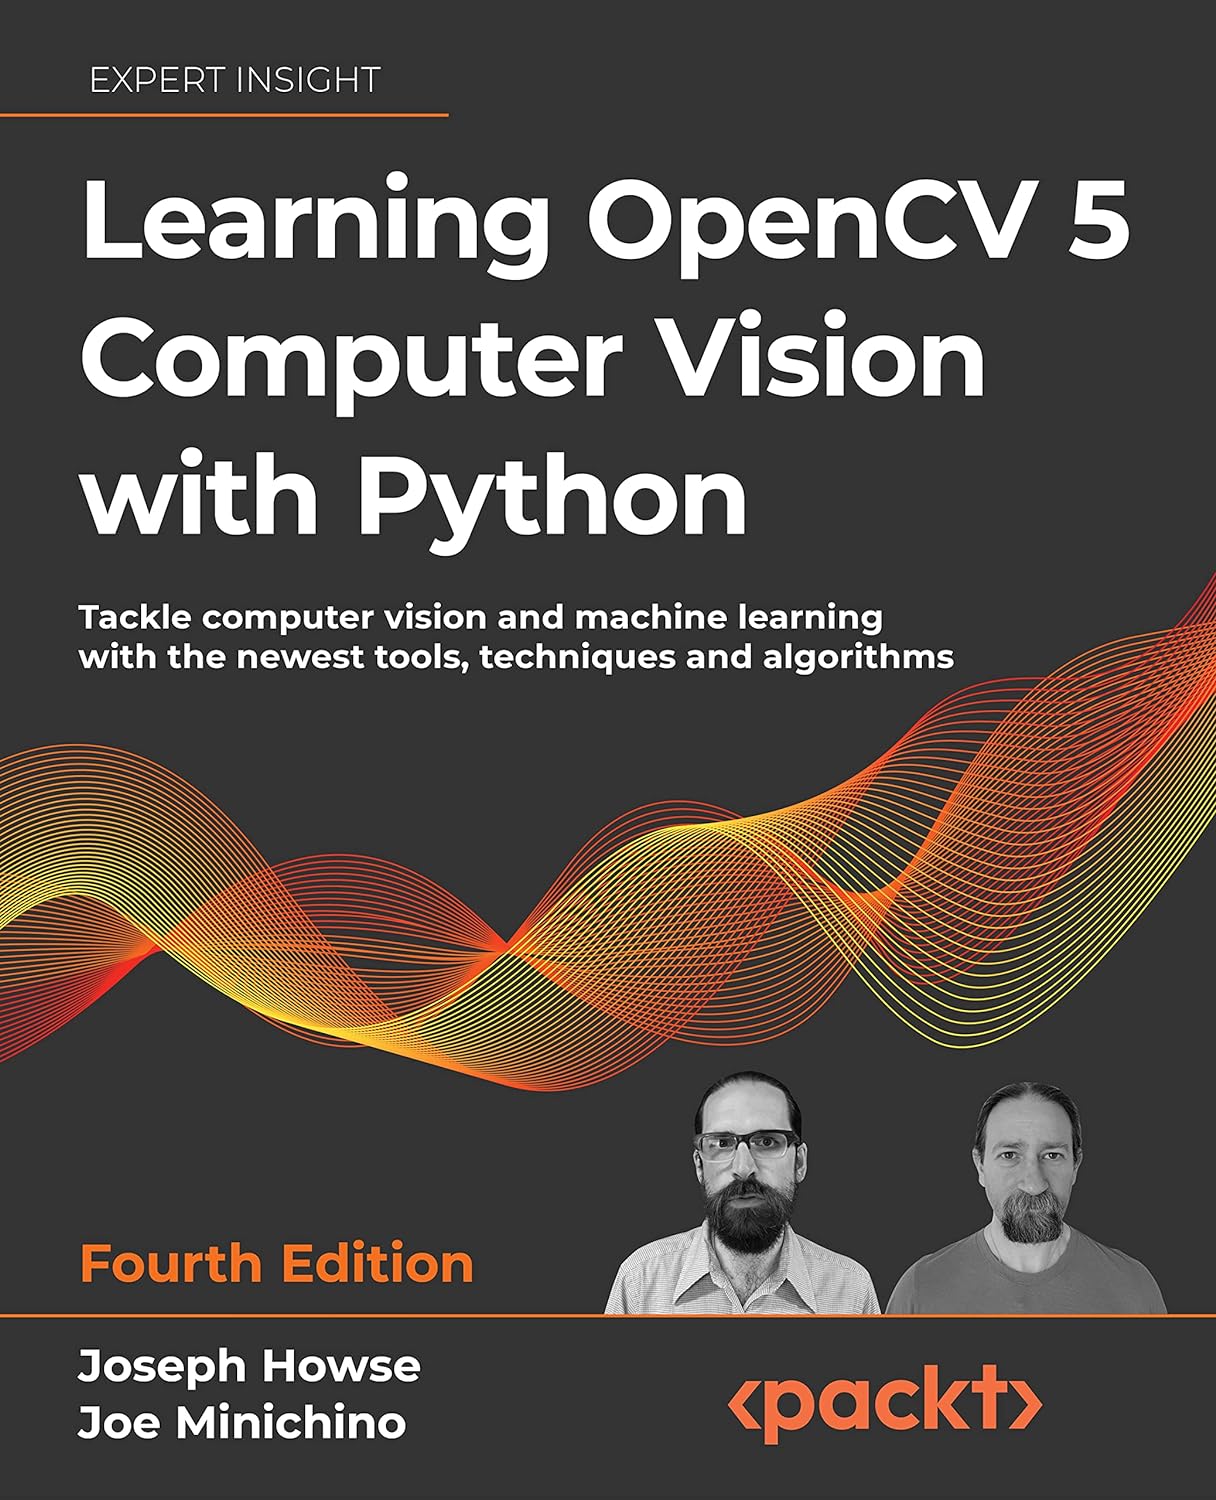 Learning OpenCV 5 Computer Vision with Python: Tackle computer vision and machine learning with the newest tools, techniques and algorithms, 4th Edition by  Joseph Howse